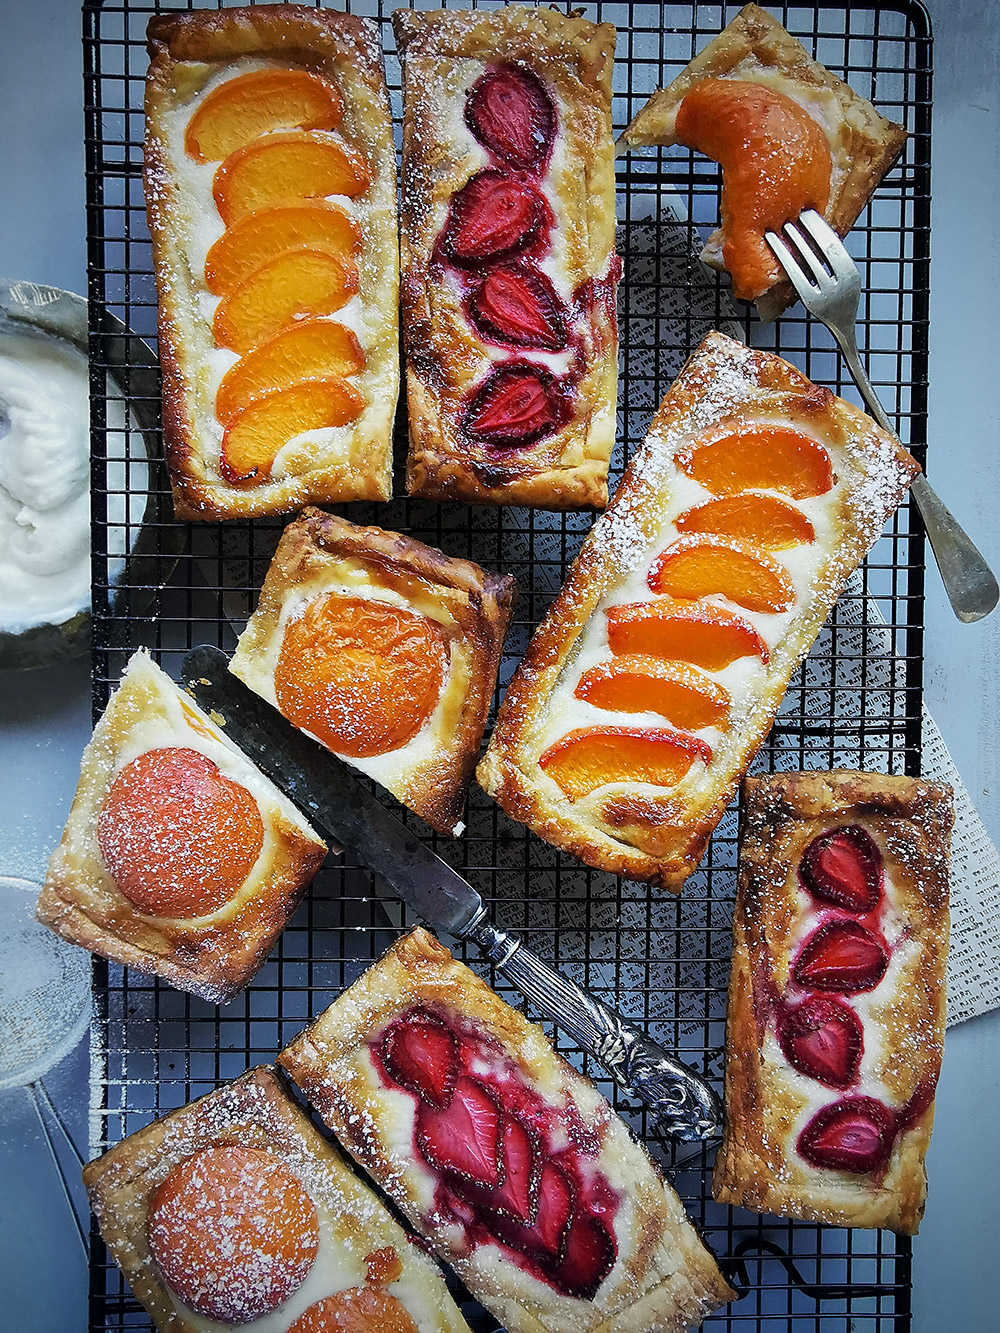 Apricot and strawberry danishes